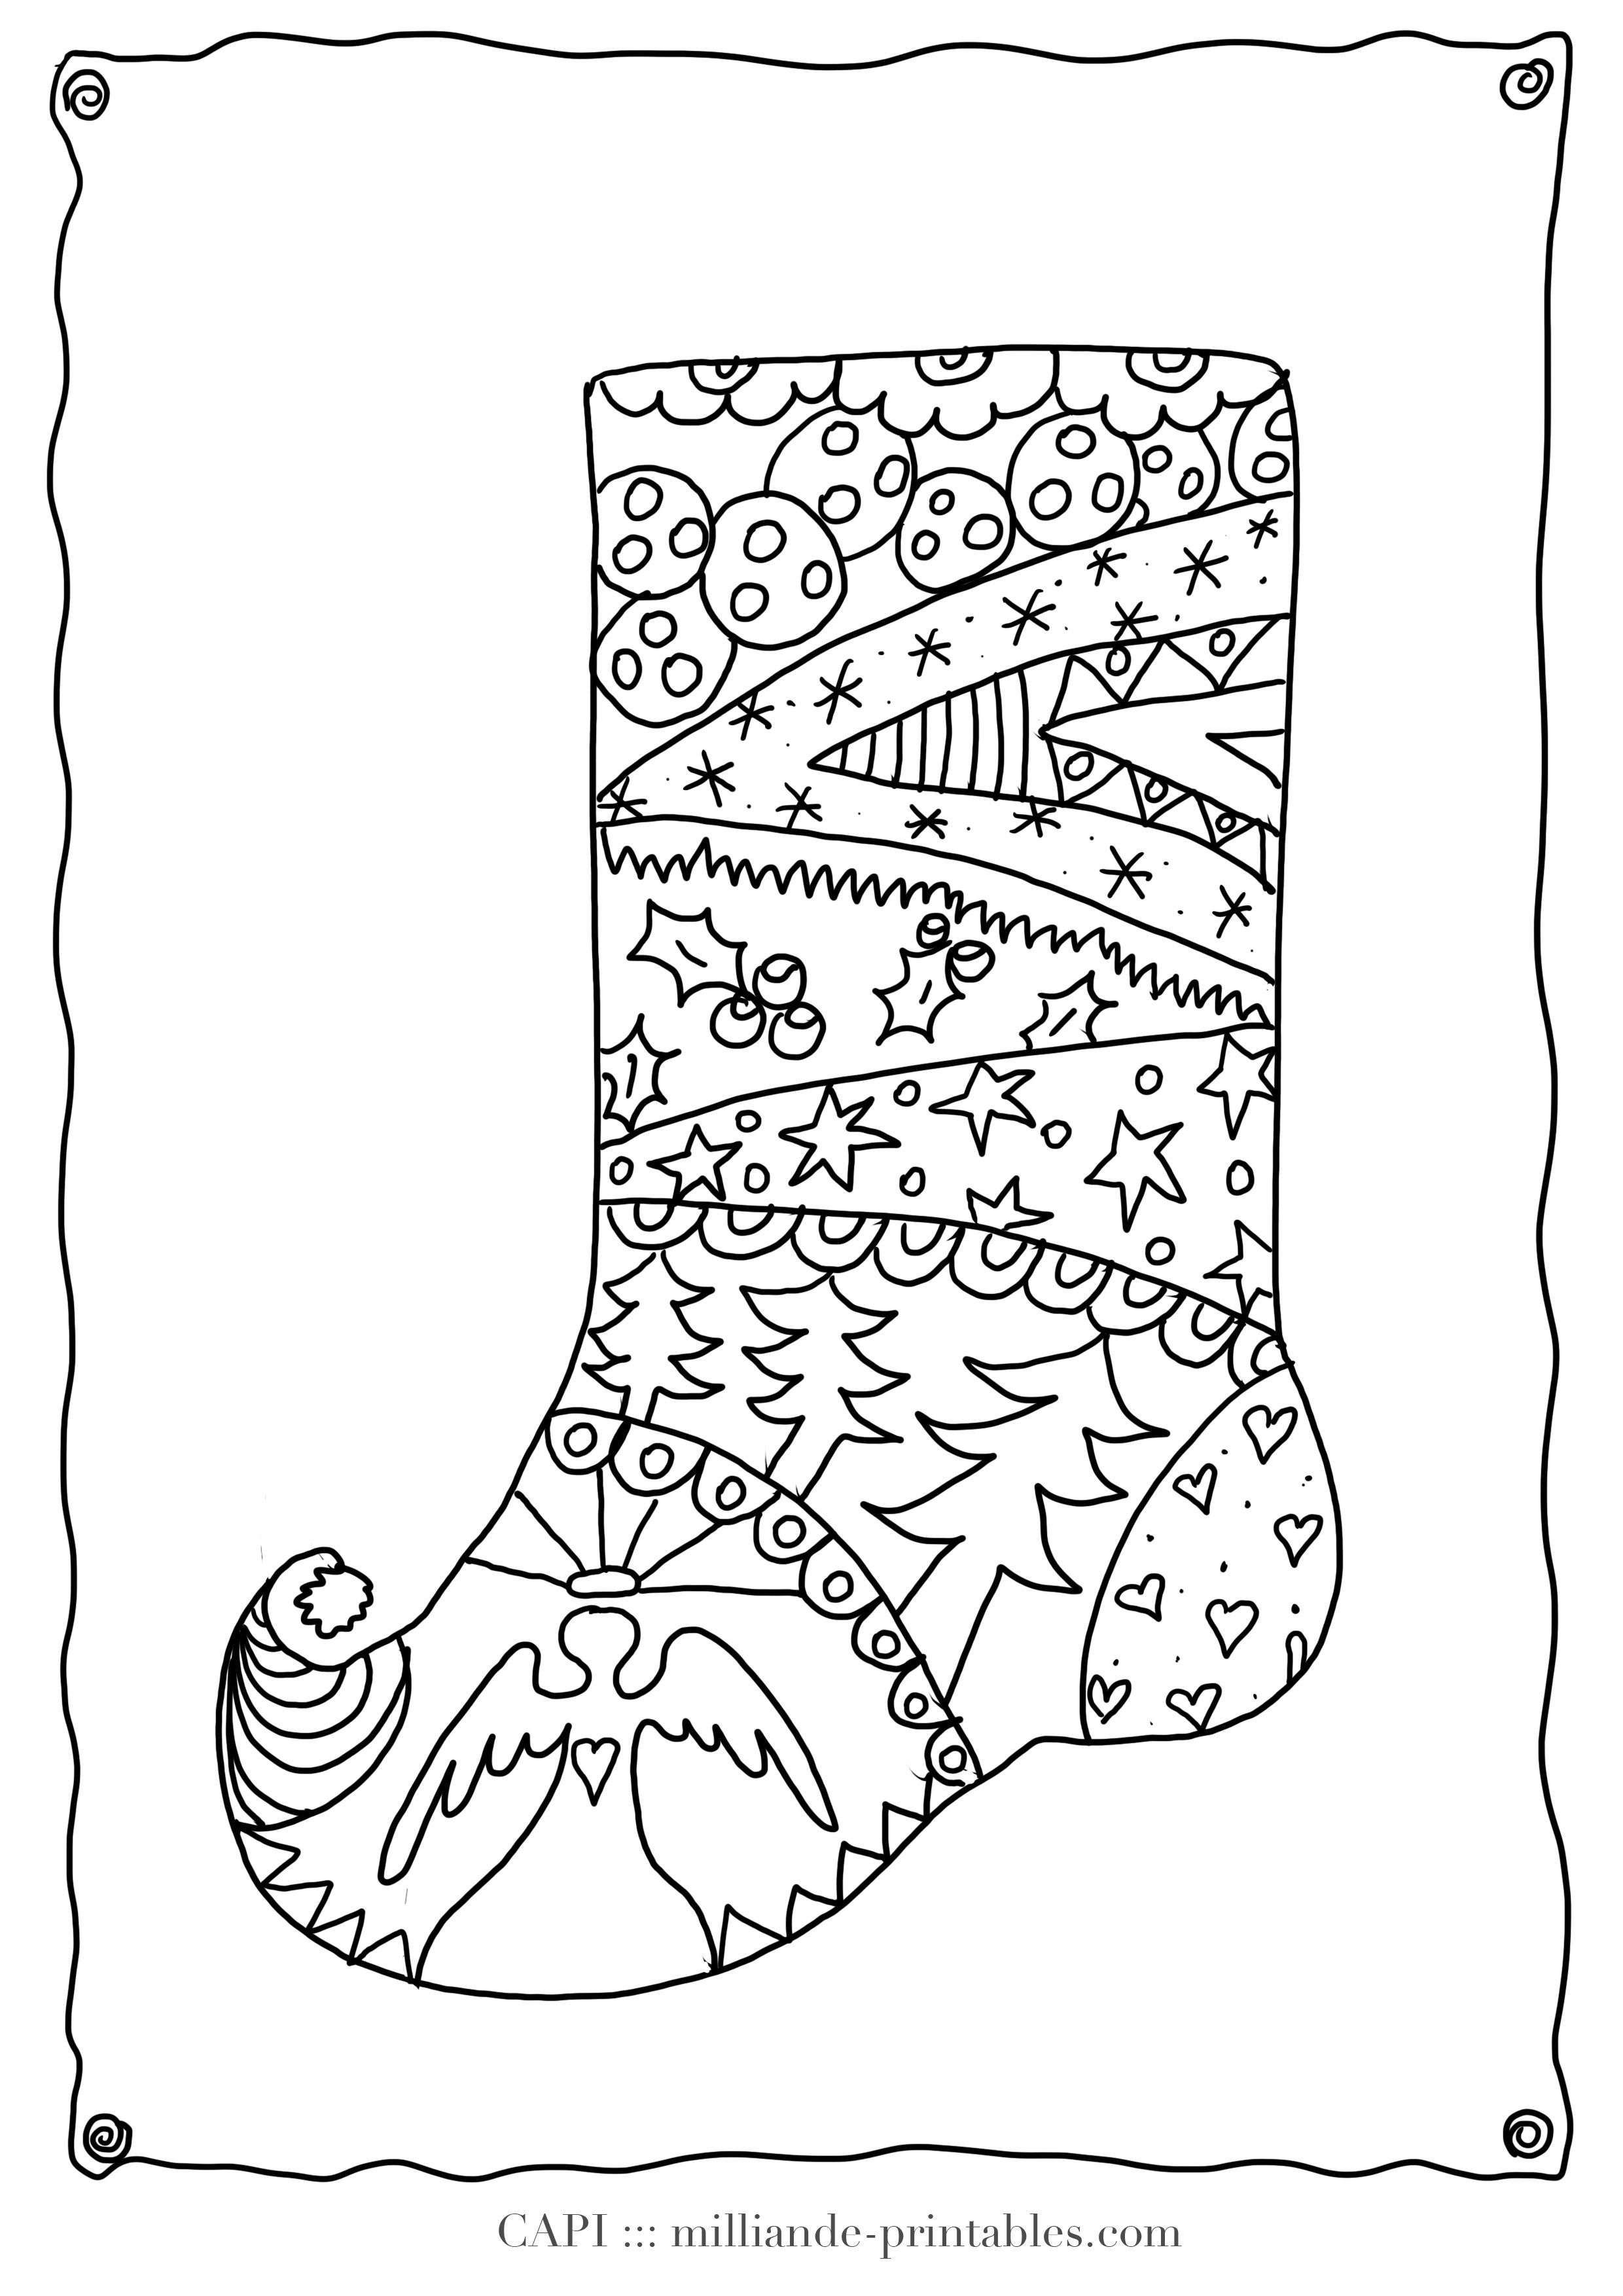 Christmas Stocking To Color Free Printable Christmas Coloring Pages - Free Printable Christmas Coloring Pages For Kids